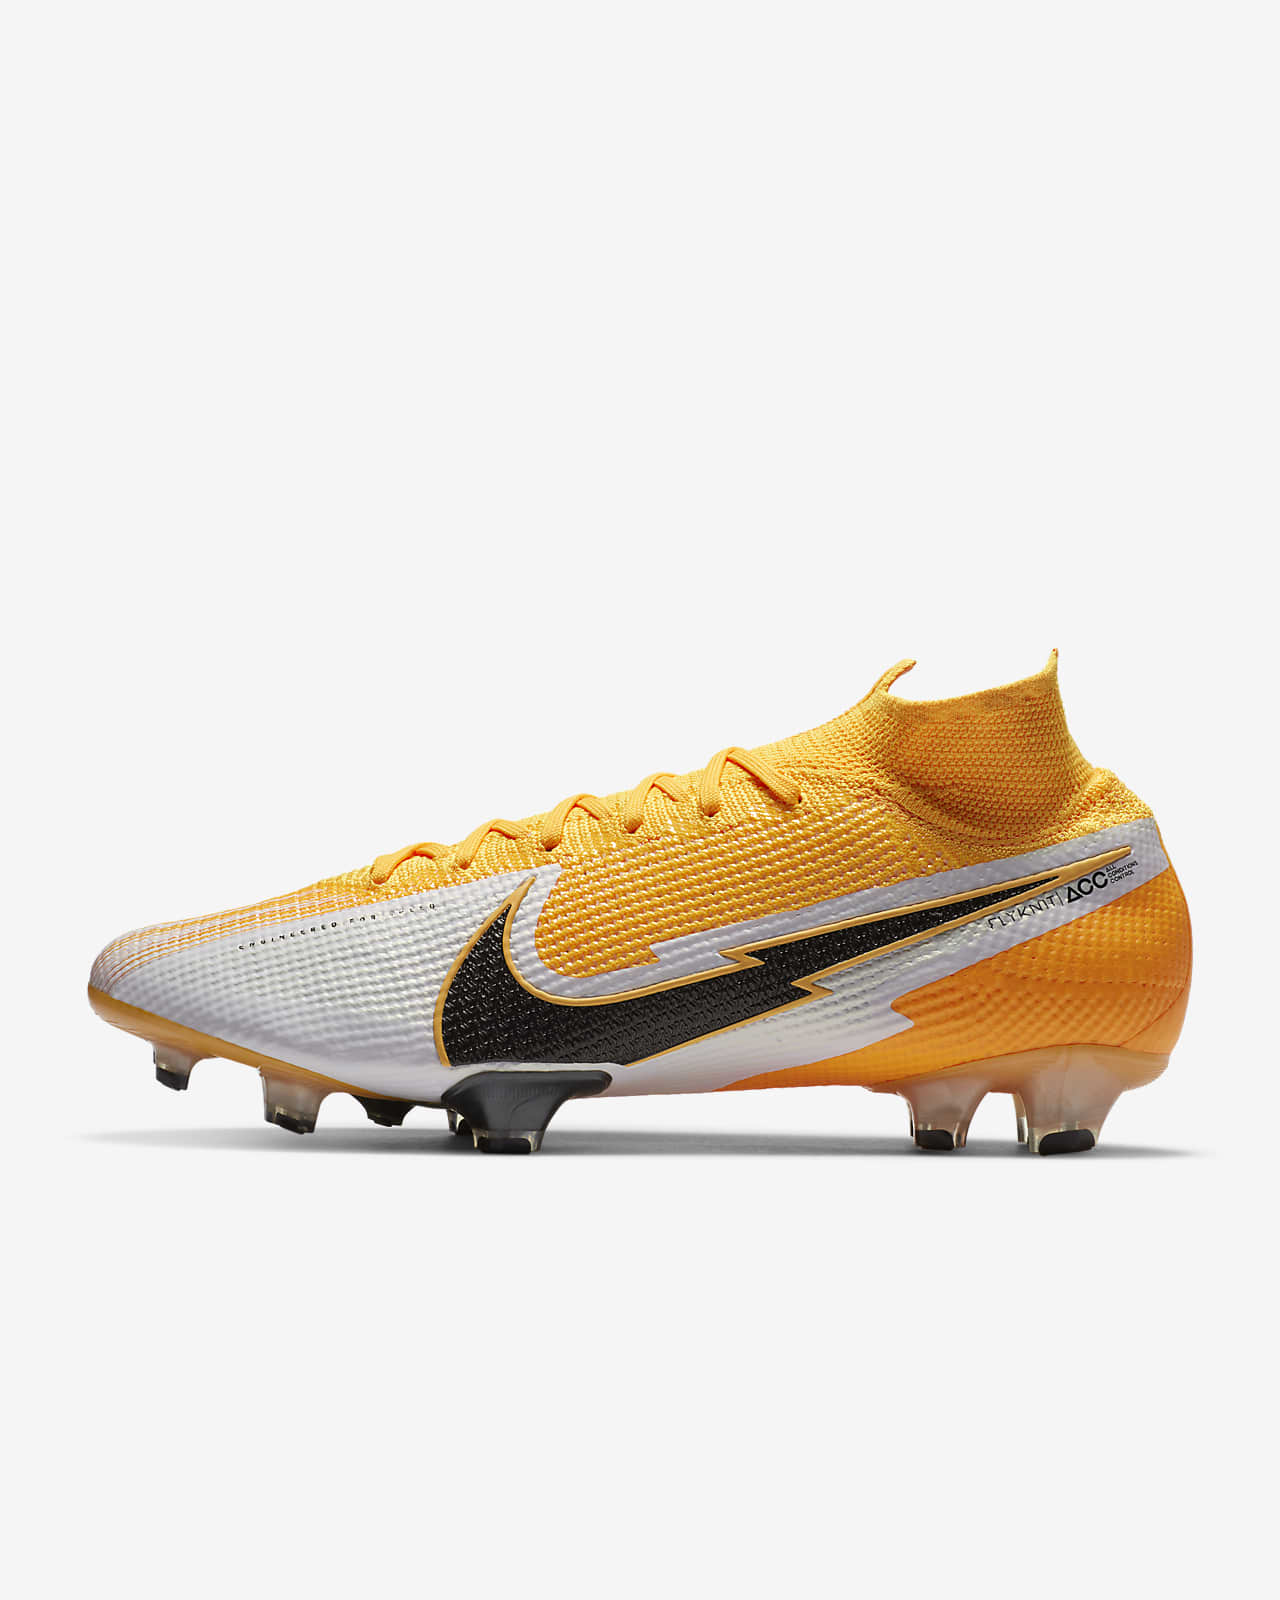 Mercurial Nike Superfly 7 Promotions